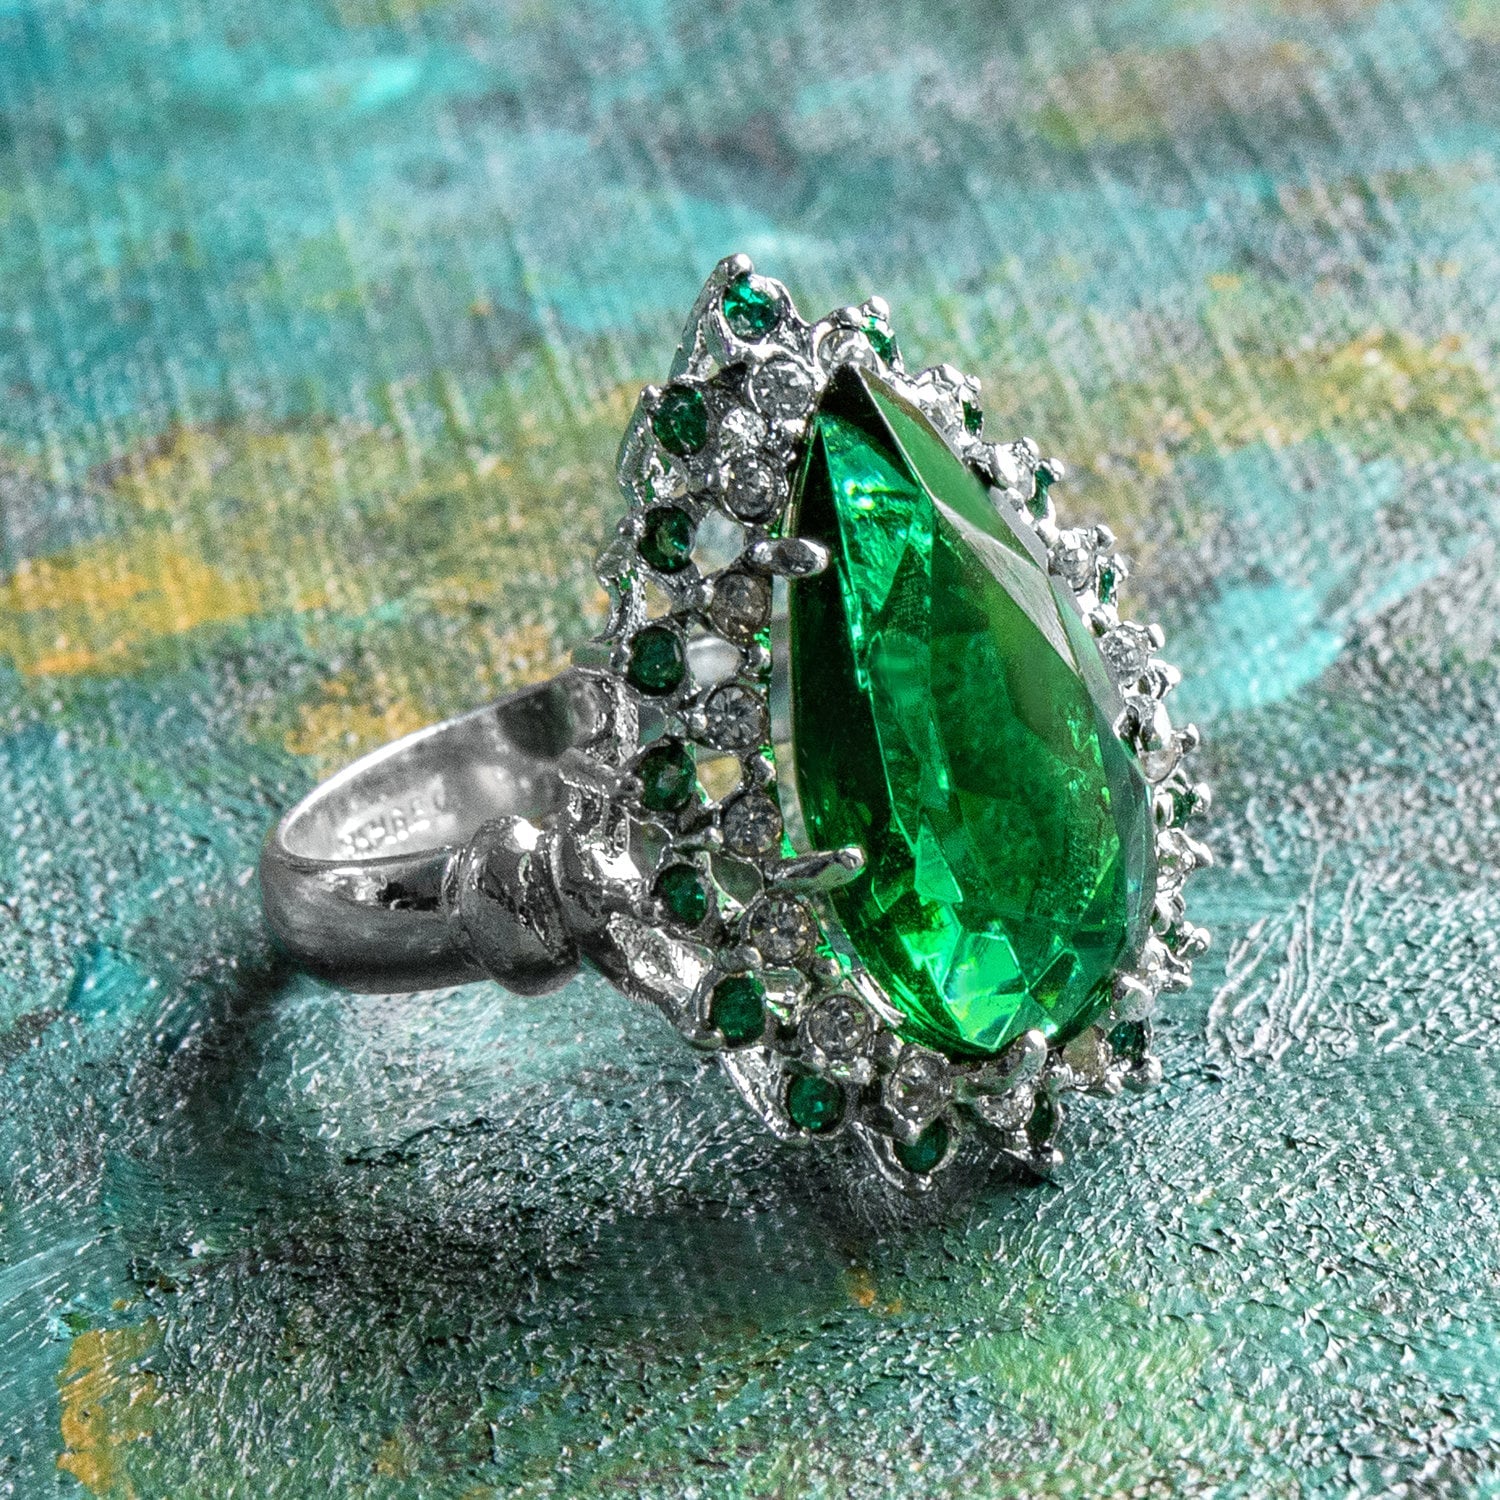 Victorian Emerald and Clear Swarovski Crystals 18k White Gold Silver Cocktail Ring Womans Jewelry #R212 - Limited Stock - Never Worn